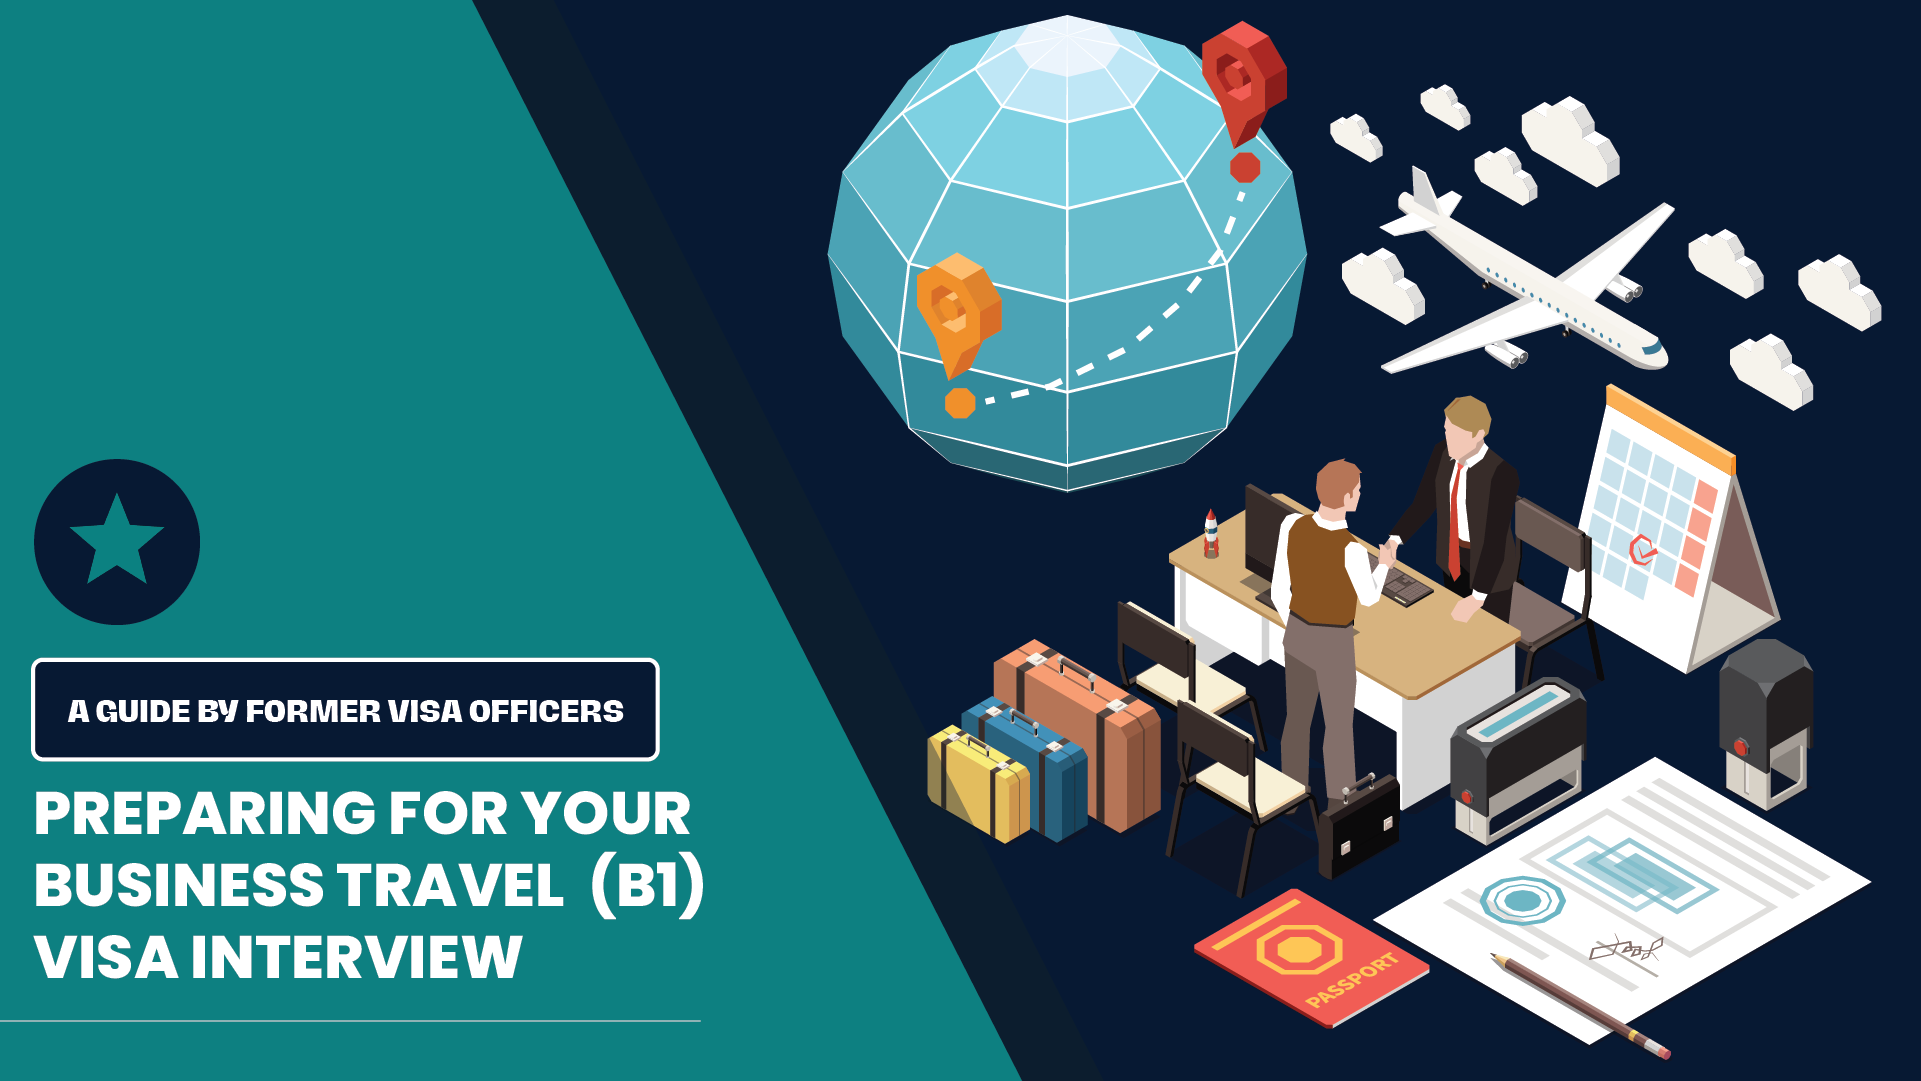 Preparing for your Business Travel (B1) Visa Interview